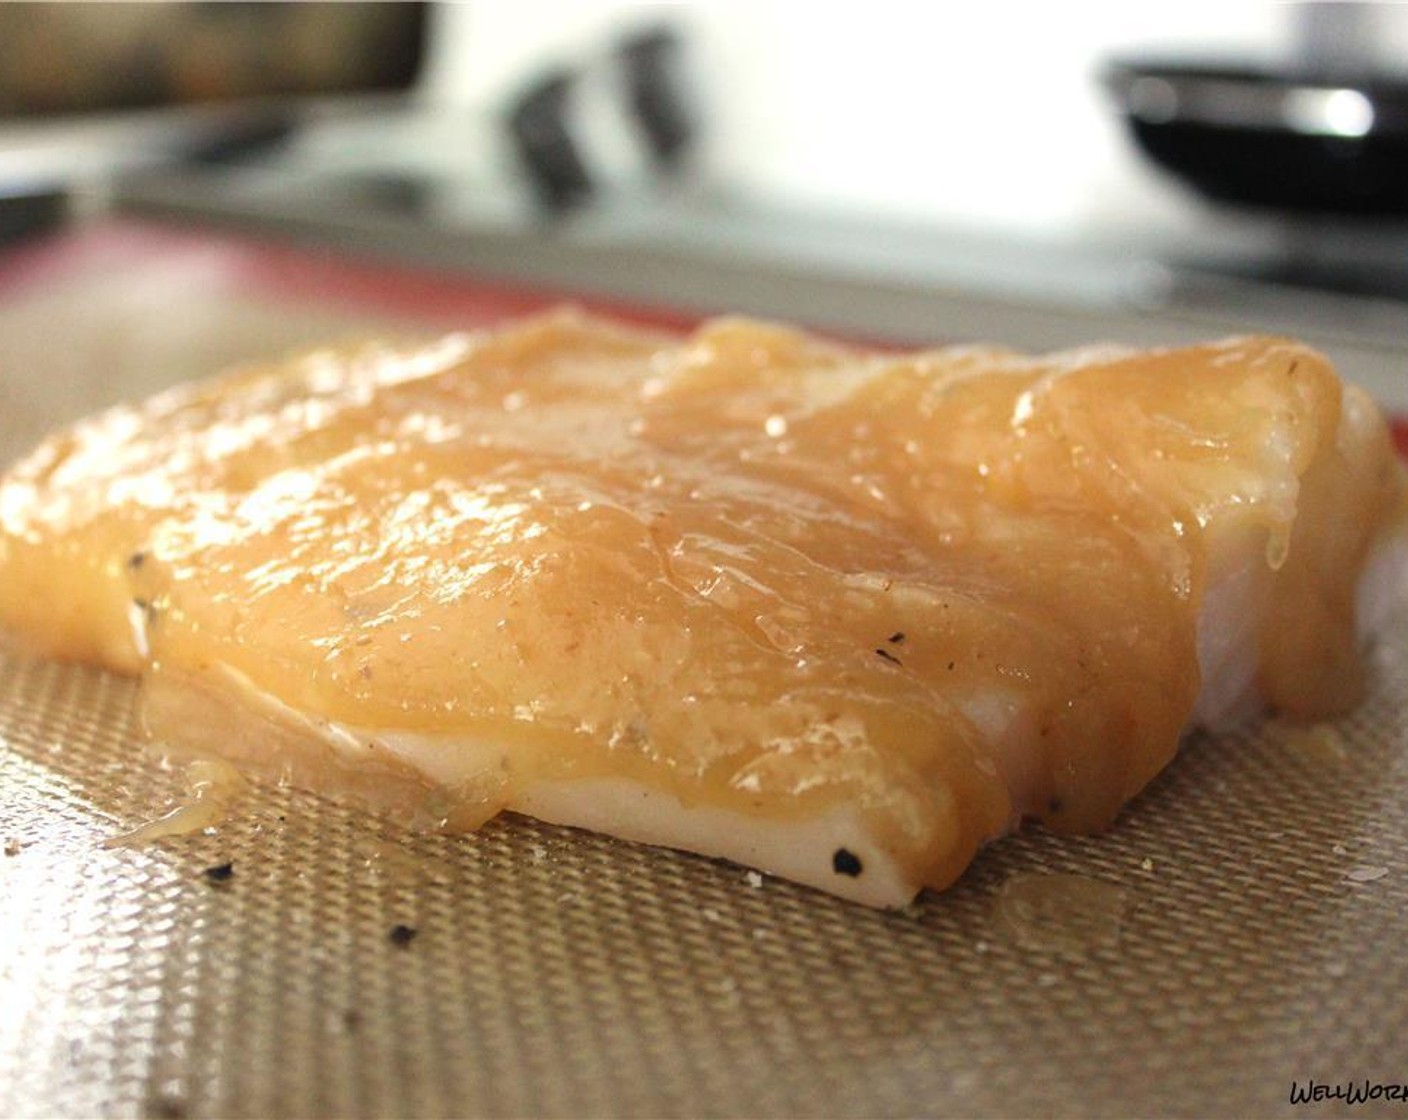 step 3 Place each Cod Fillets (4) on a lined sheet tray and sprinkle with Salt (to taste) and Ground Black Pepper (to taste). Cover each fillet with the miso/mirin mixture evenly. Bake in the oven for 5-10 minutes depending on thickness.